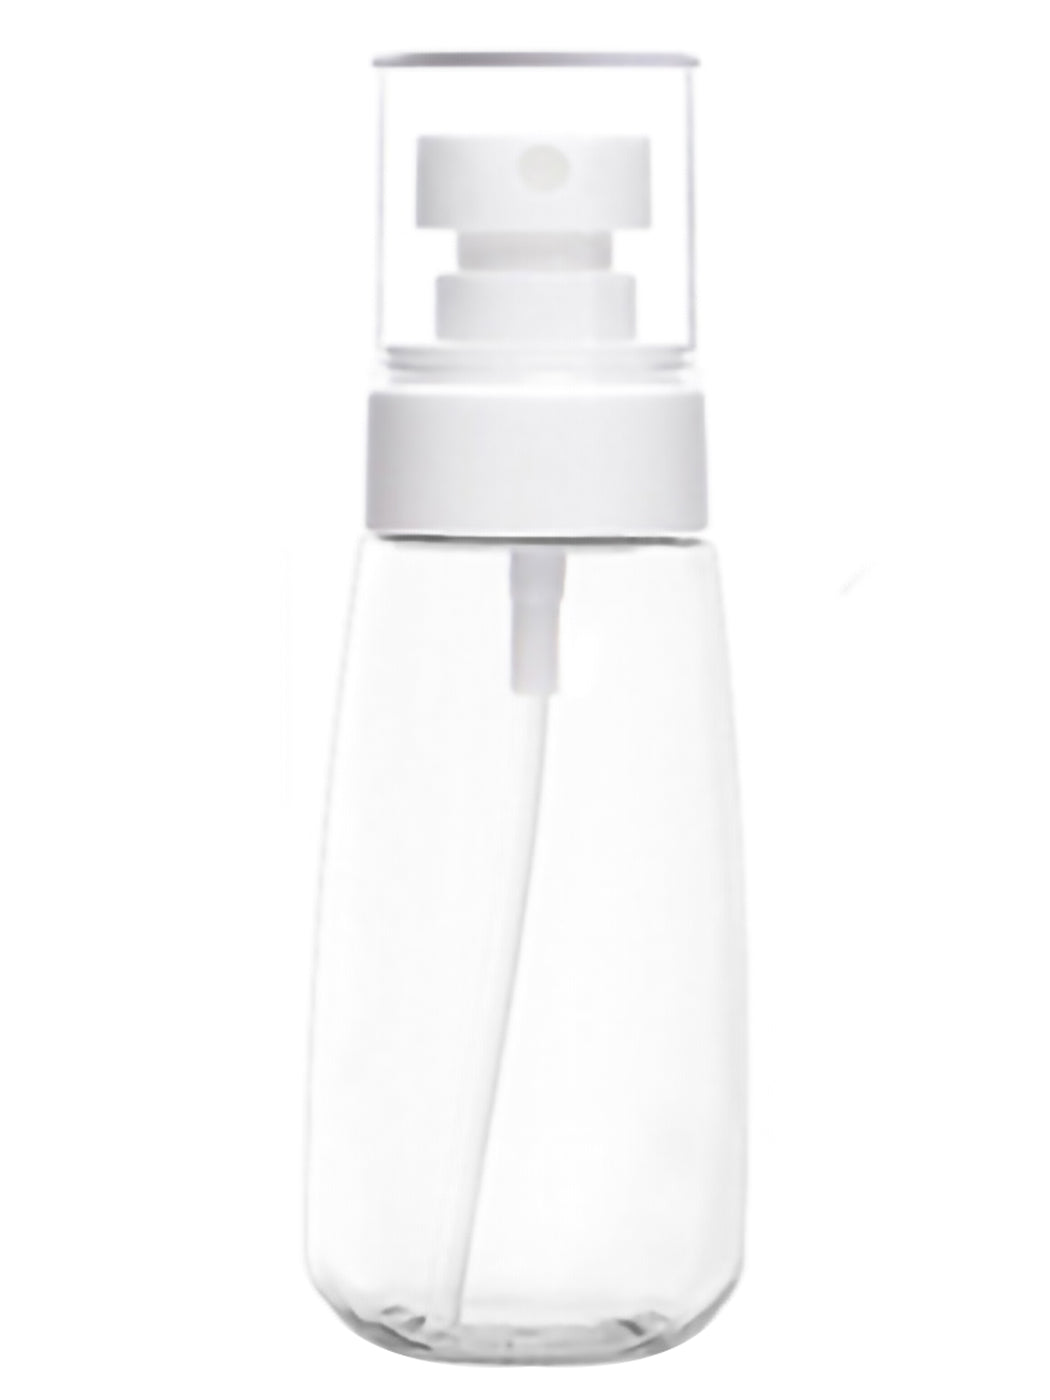 Plastic Clear Spray Bottle Refillable Container for Essential Oils